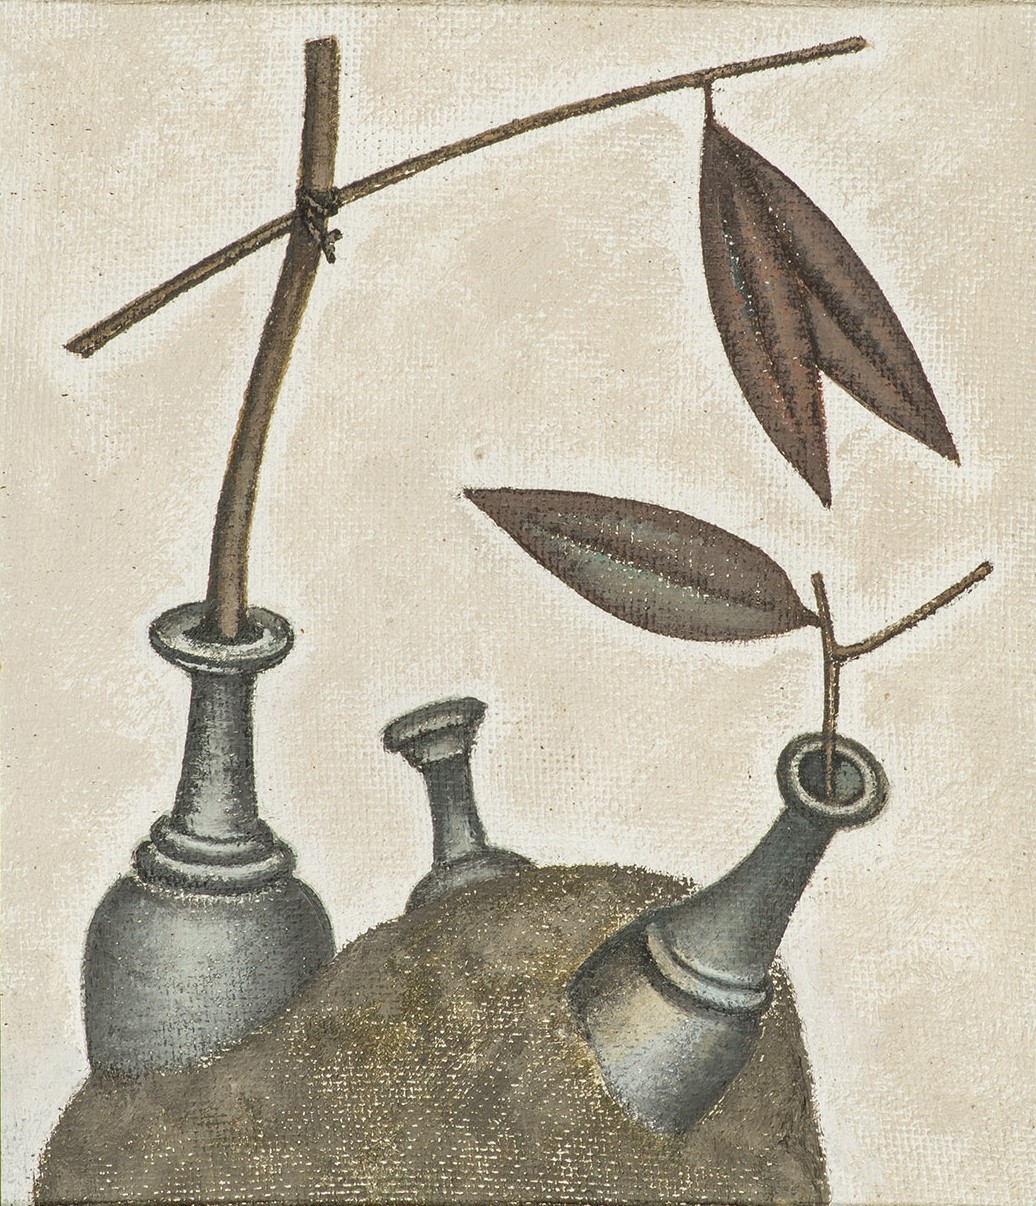 Still life with bottles and branches.